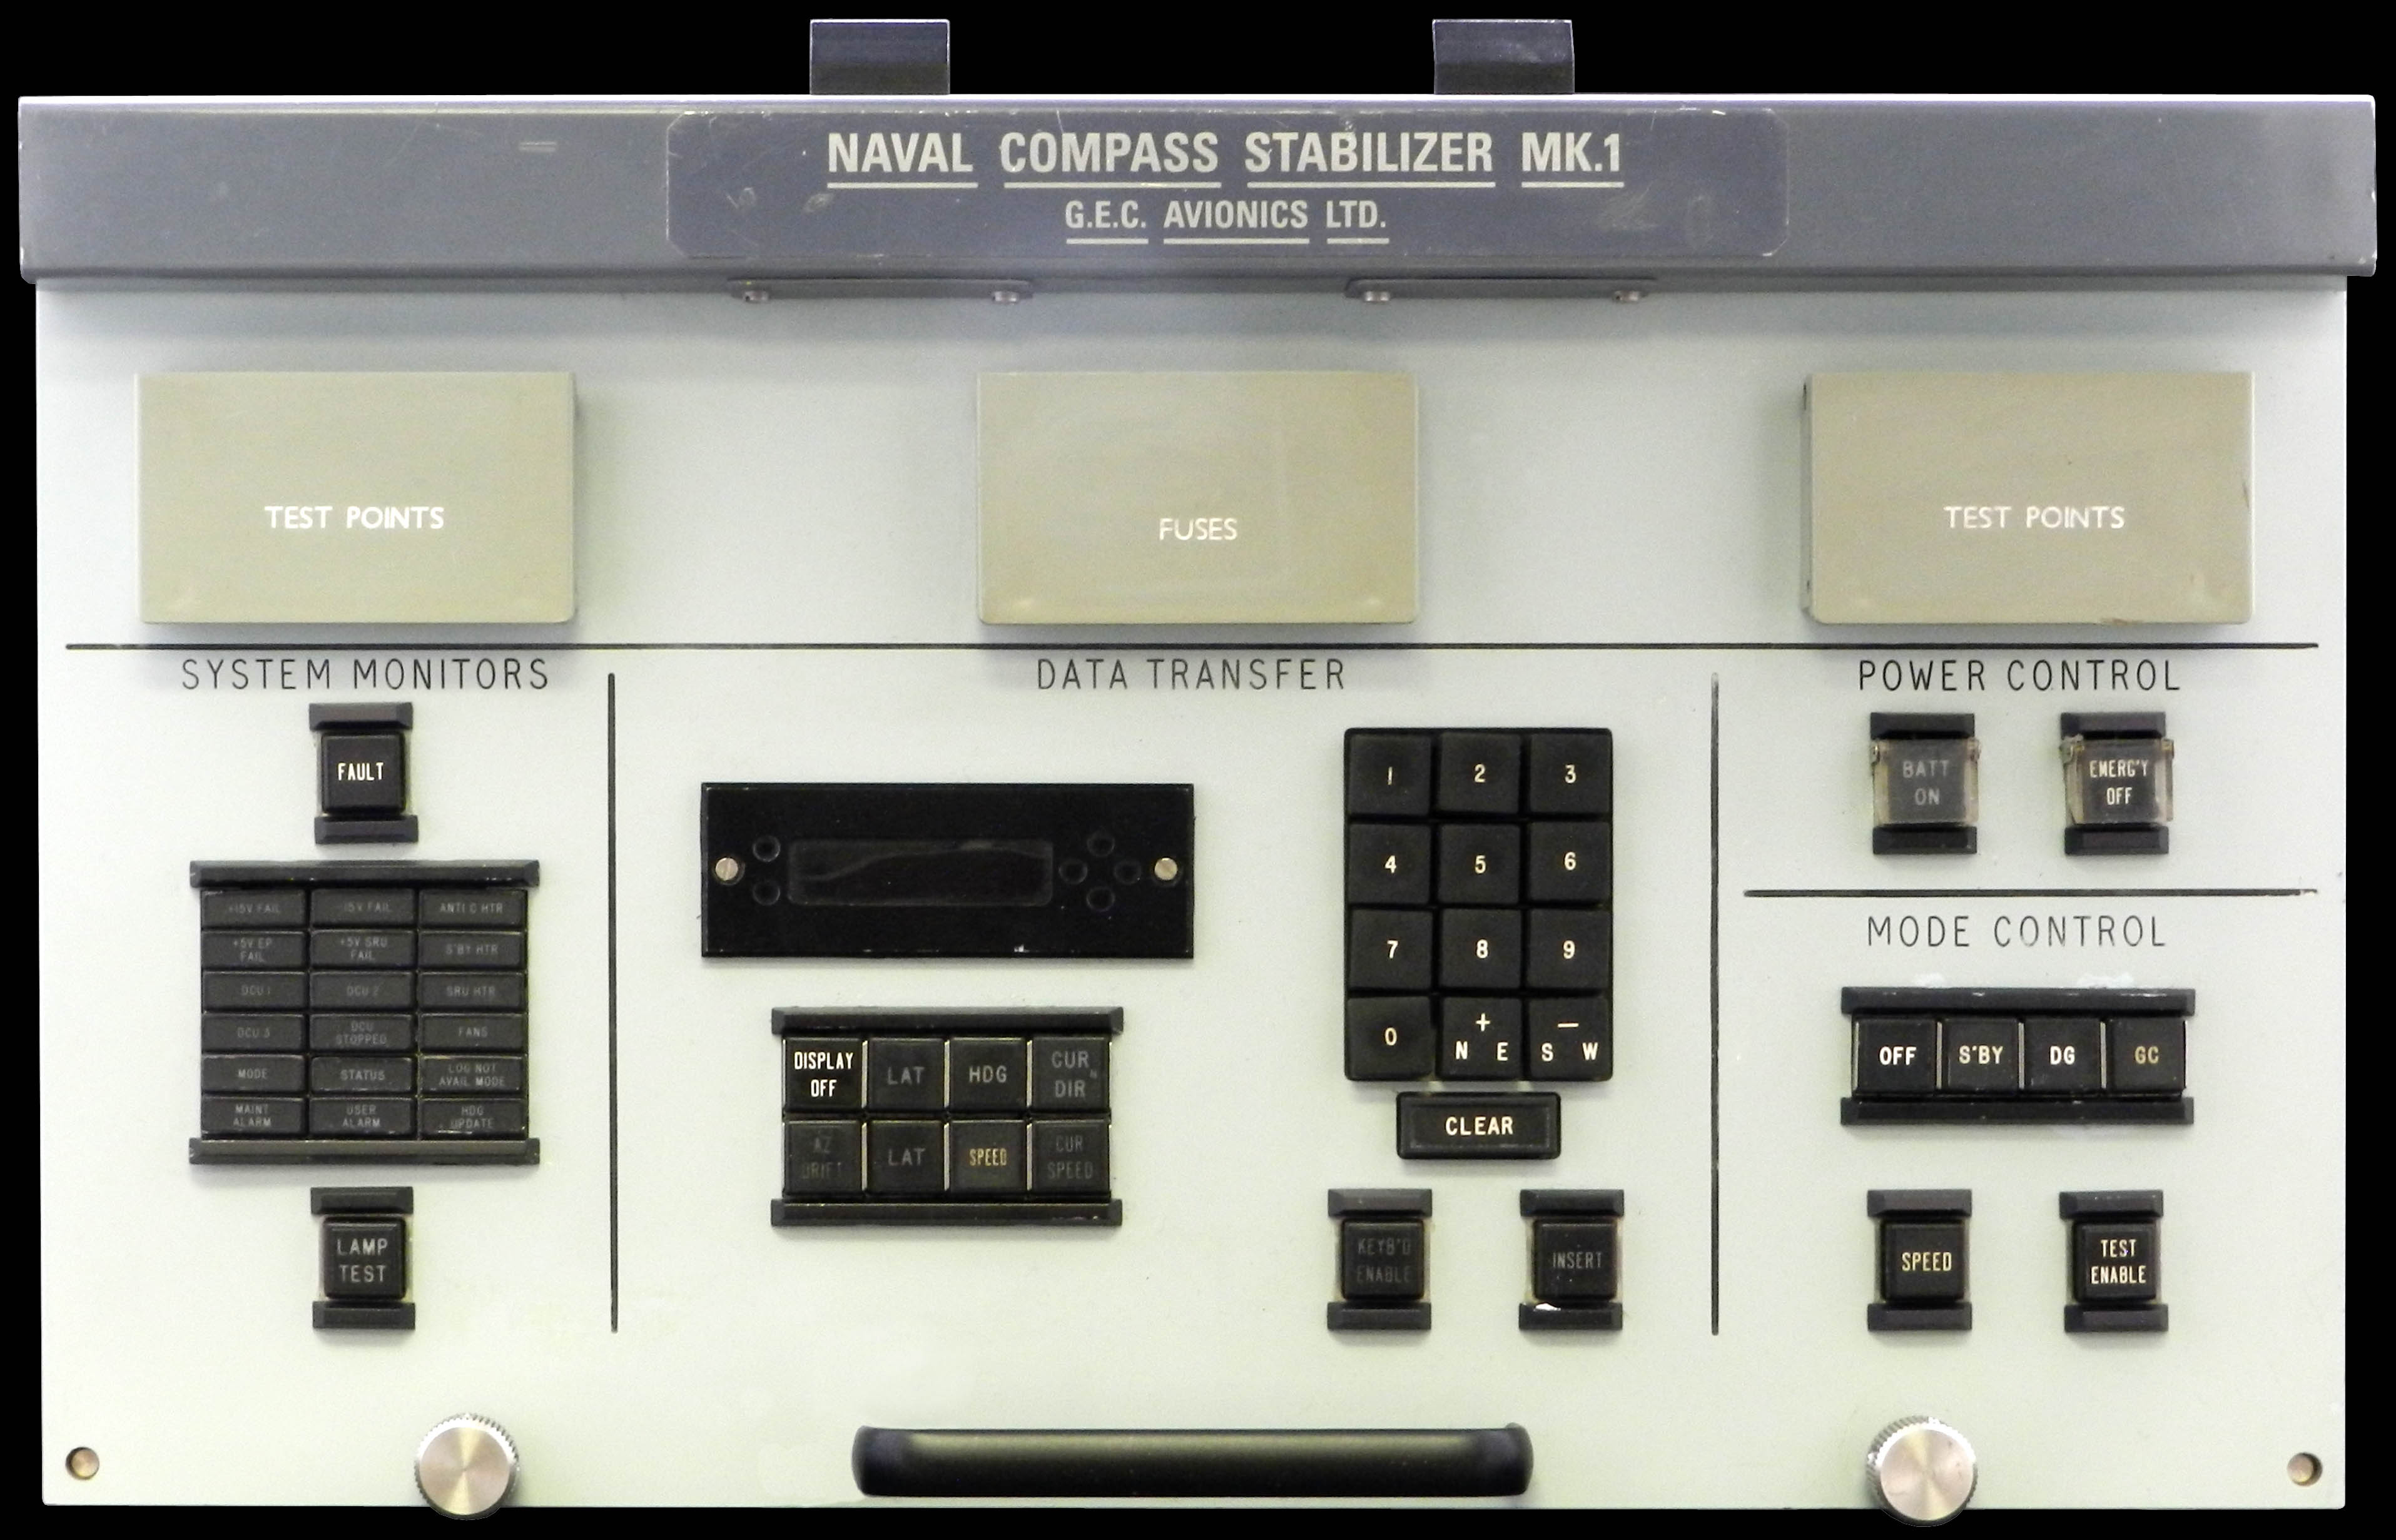 NCS1 Control and Indicator Panel